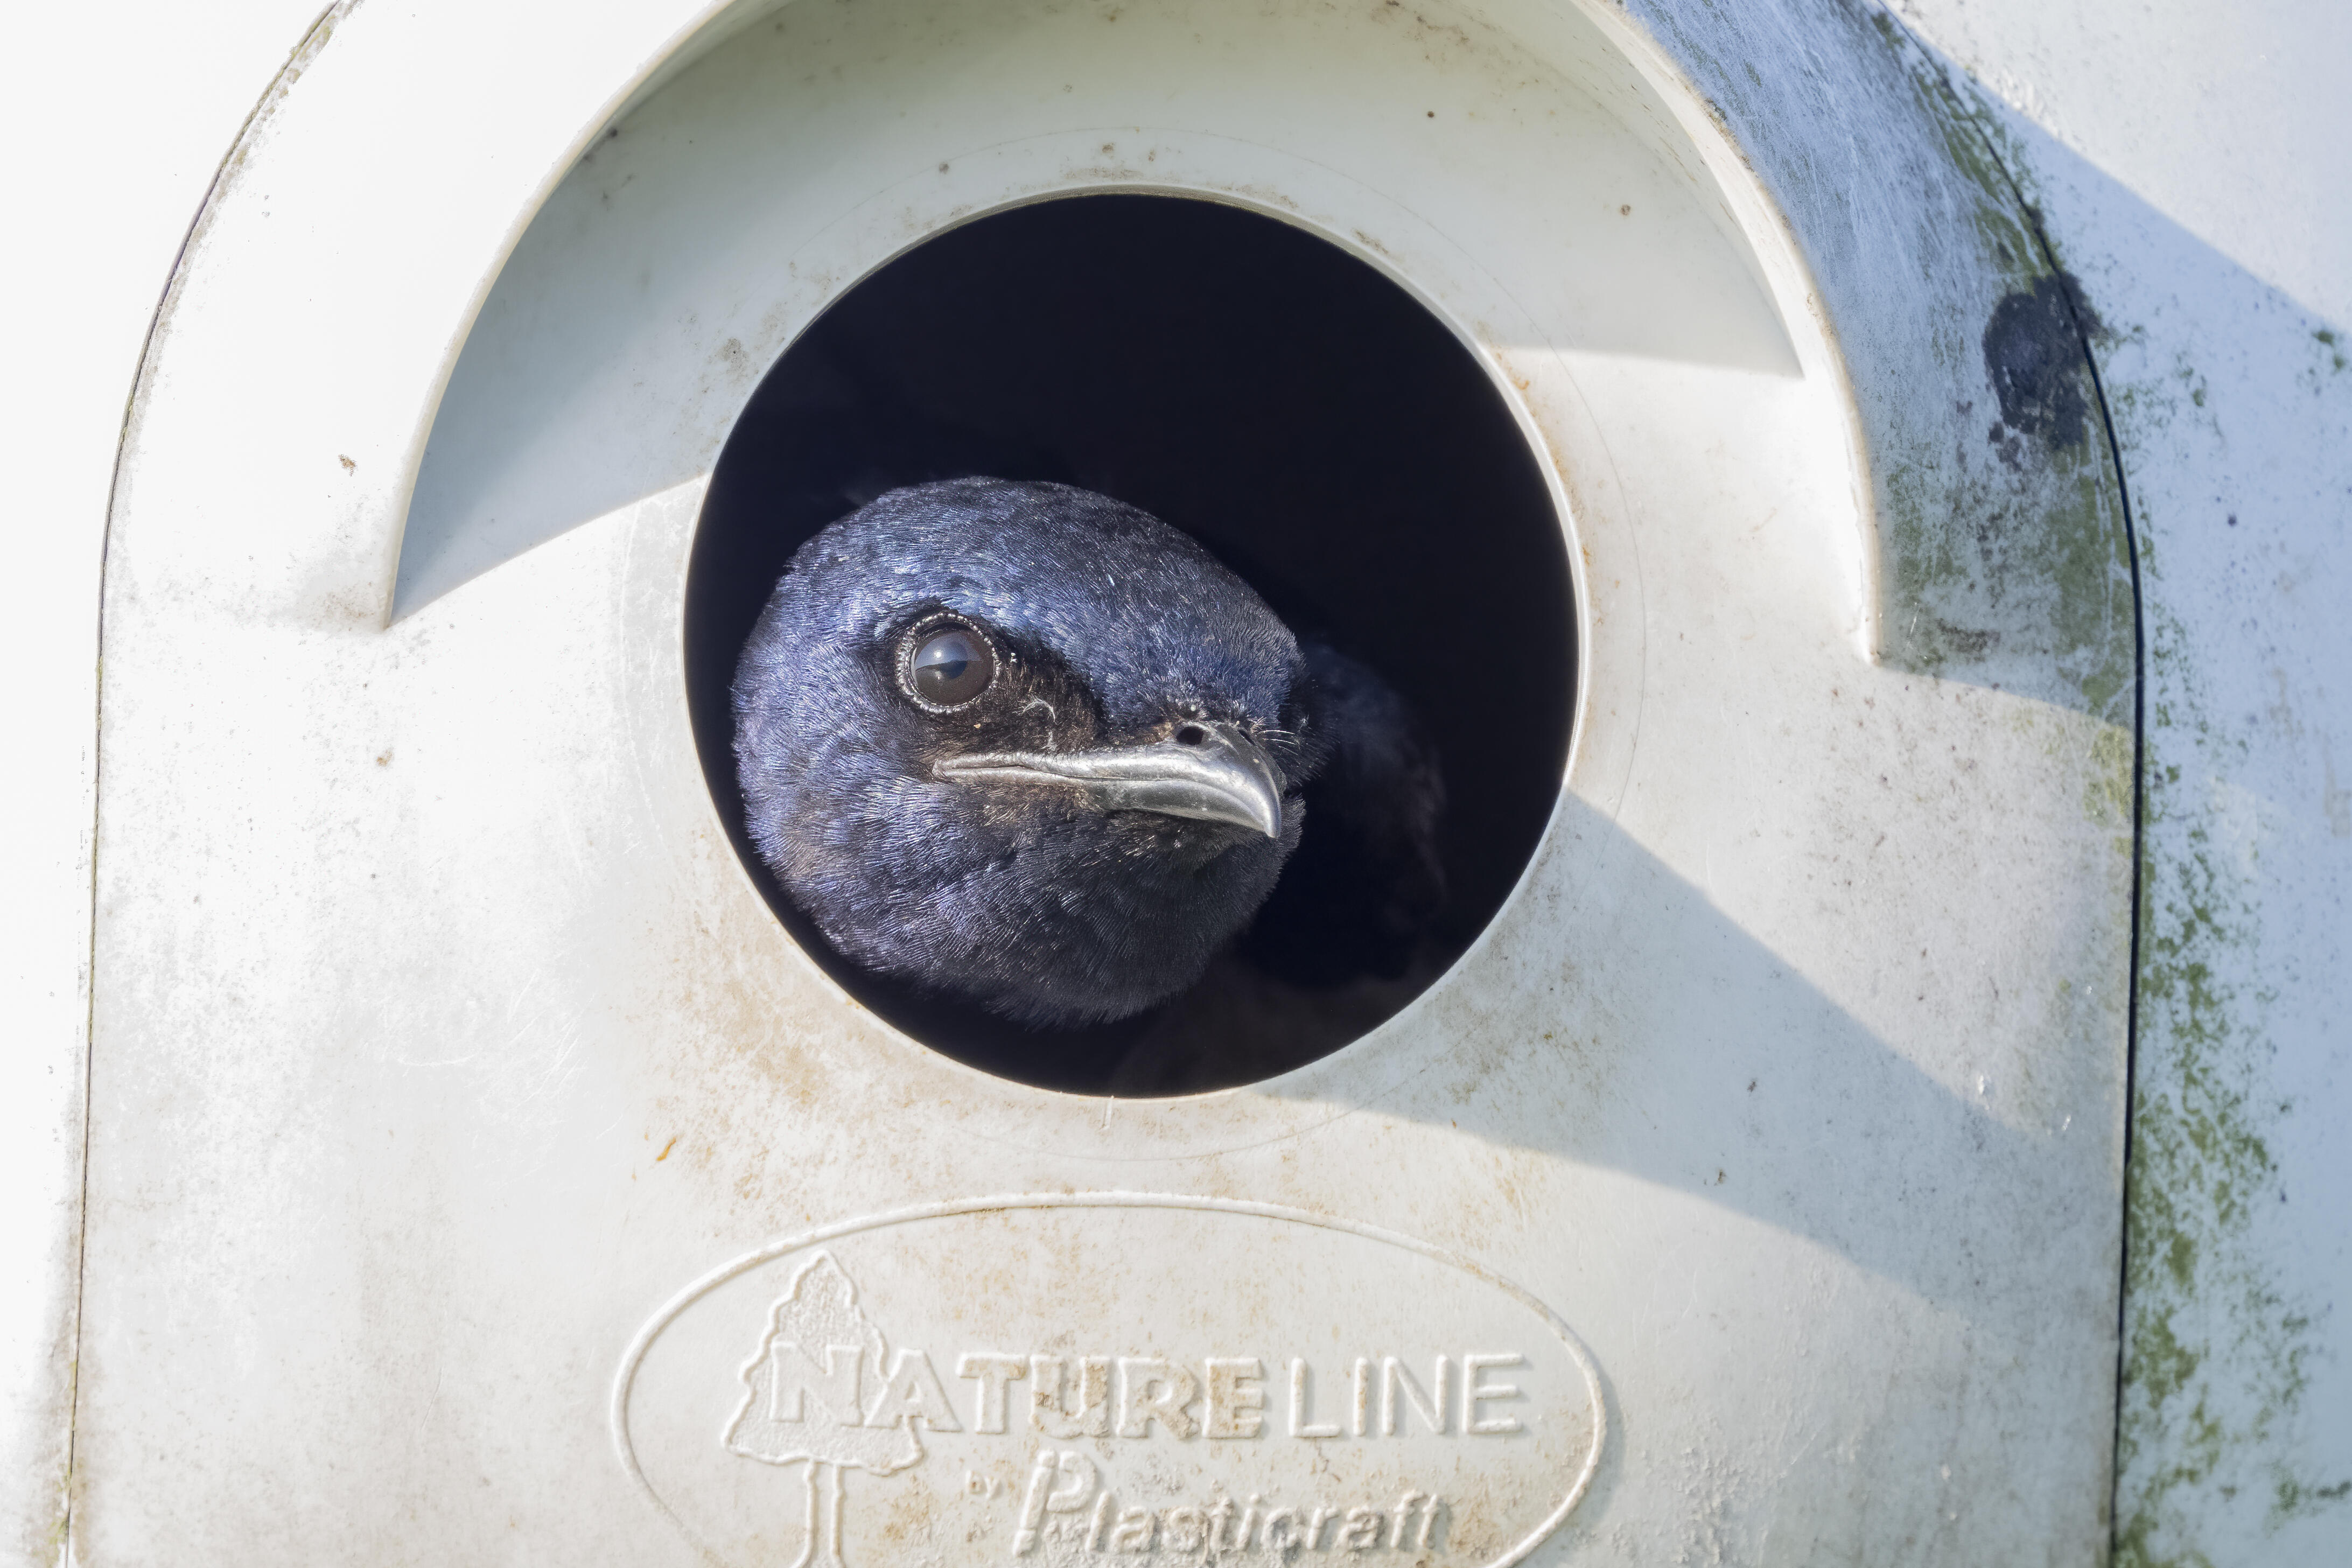 An adult Purple Martin pokes its head out of the circular entrance of a white nest box.